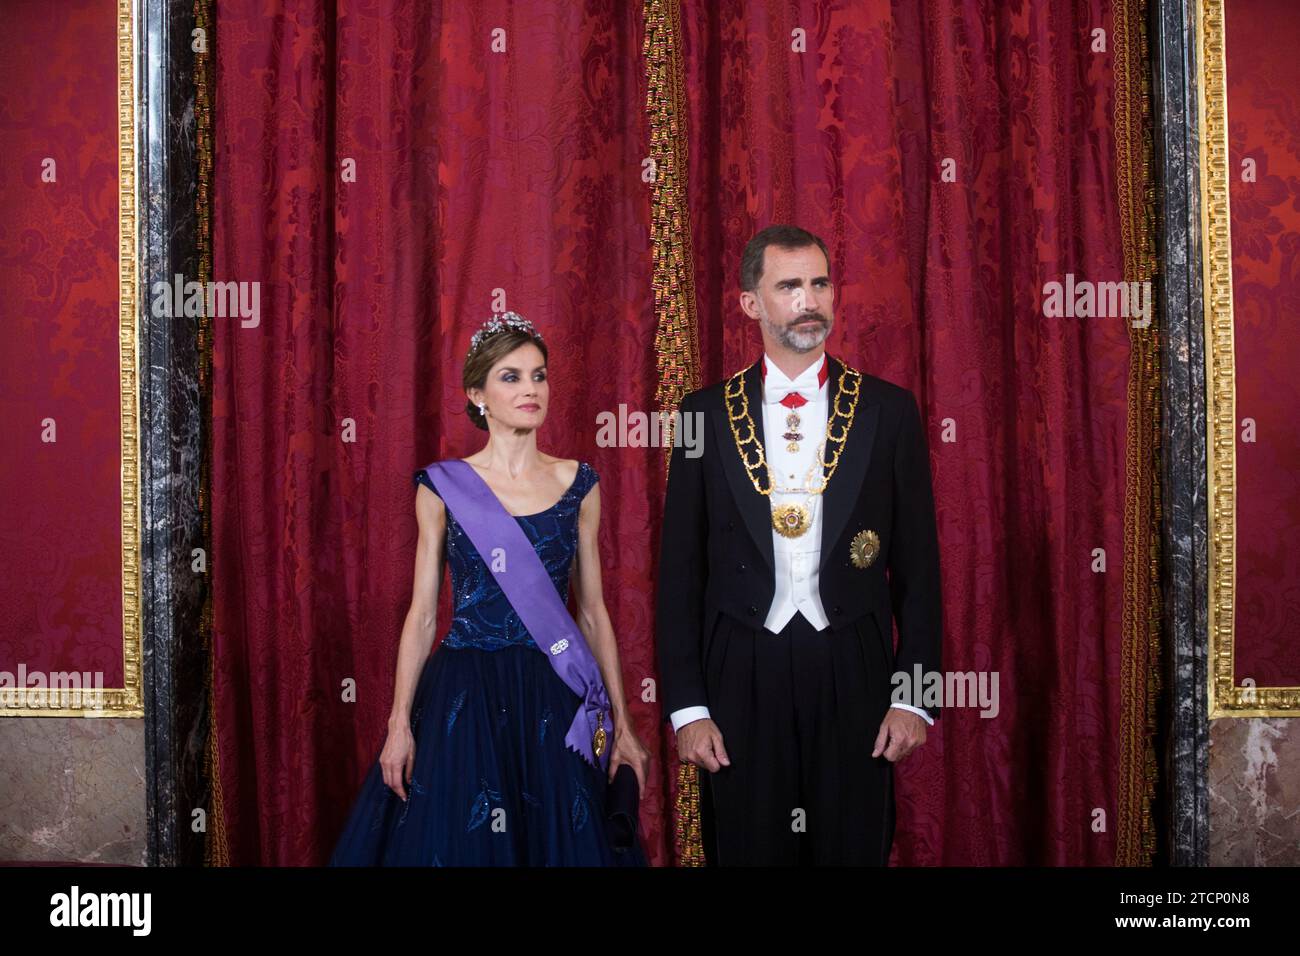 Madrid, 07/07/2015. King Felipe VI and Queen Letizia offer a gala dinner at the Royal Palace to the president of Peru Ollanta Humala and his wife Nadine Heredia. Photo: Ángel de Antonio ARCHDC. Credit: Album / Archivo ABC / Ángel de Antonio Stock Photo